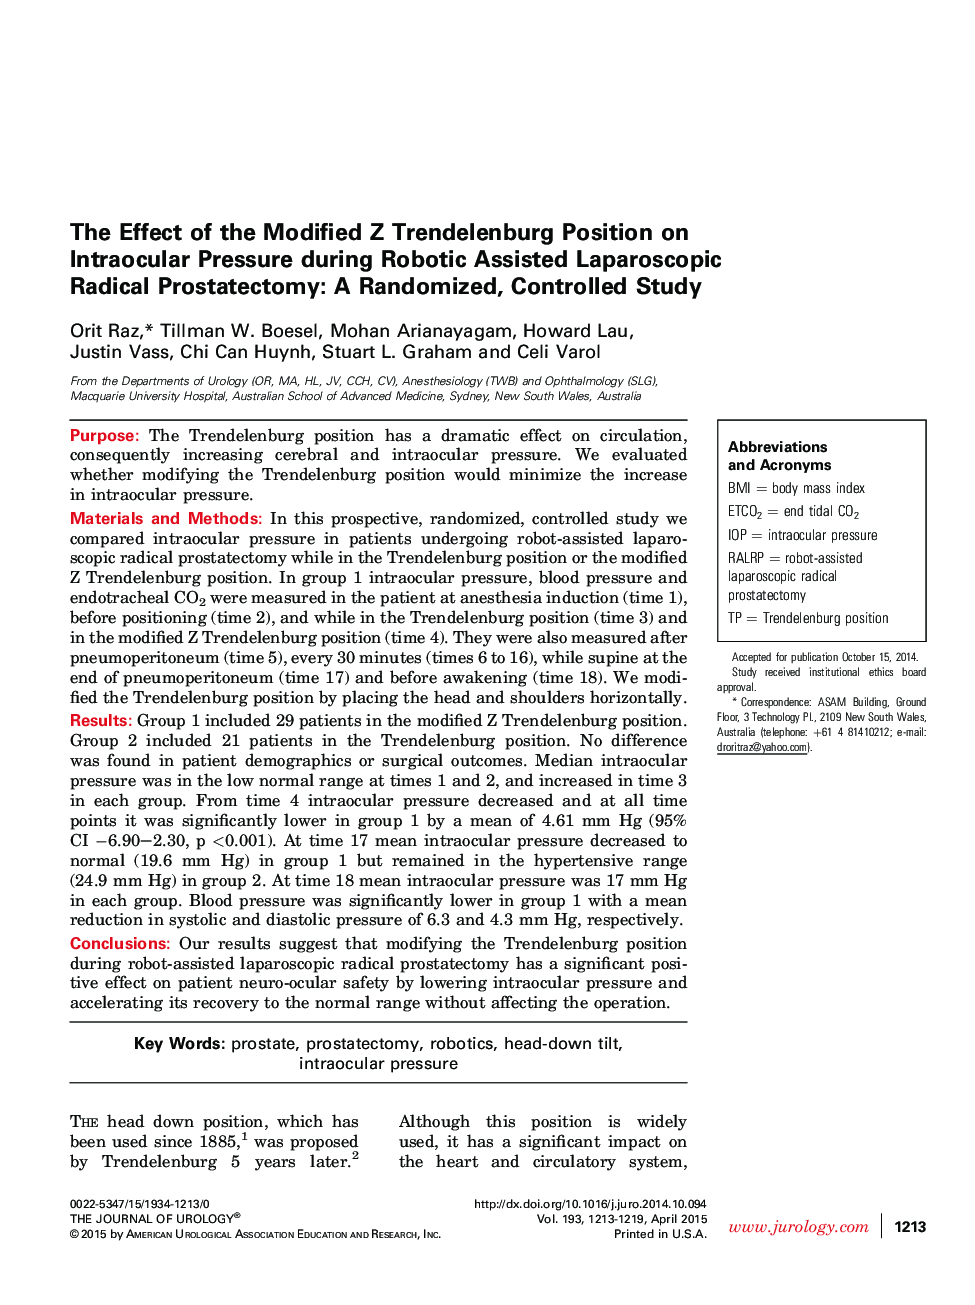 The Effect of the Modified Z Trendelenburg Position on Intraocular Pressure during Robotic Assisted Laparoscopic Radical Prostatectomy: A Randomized, Controlled Study 